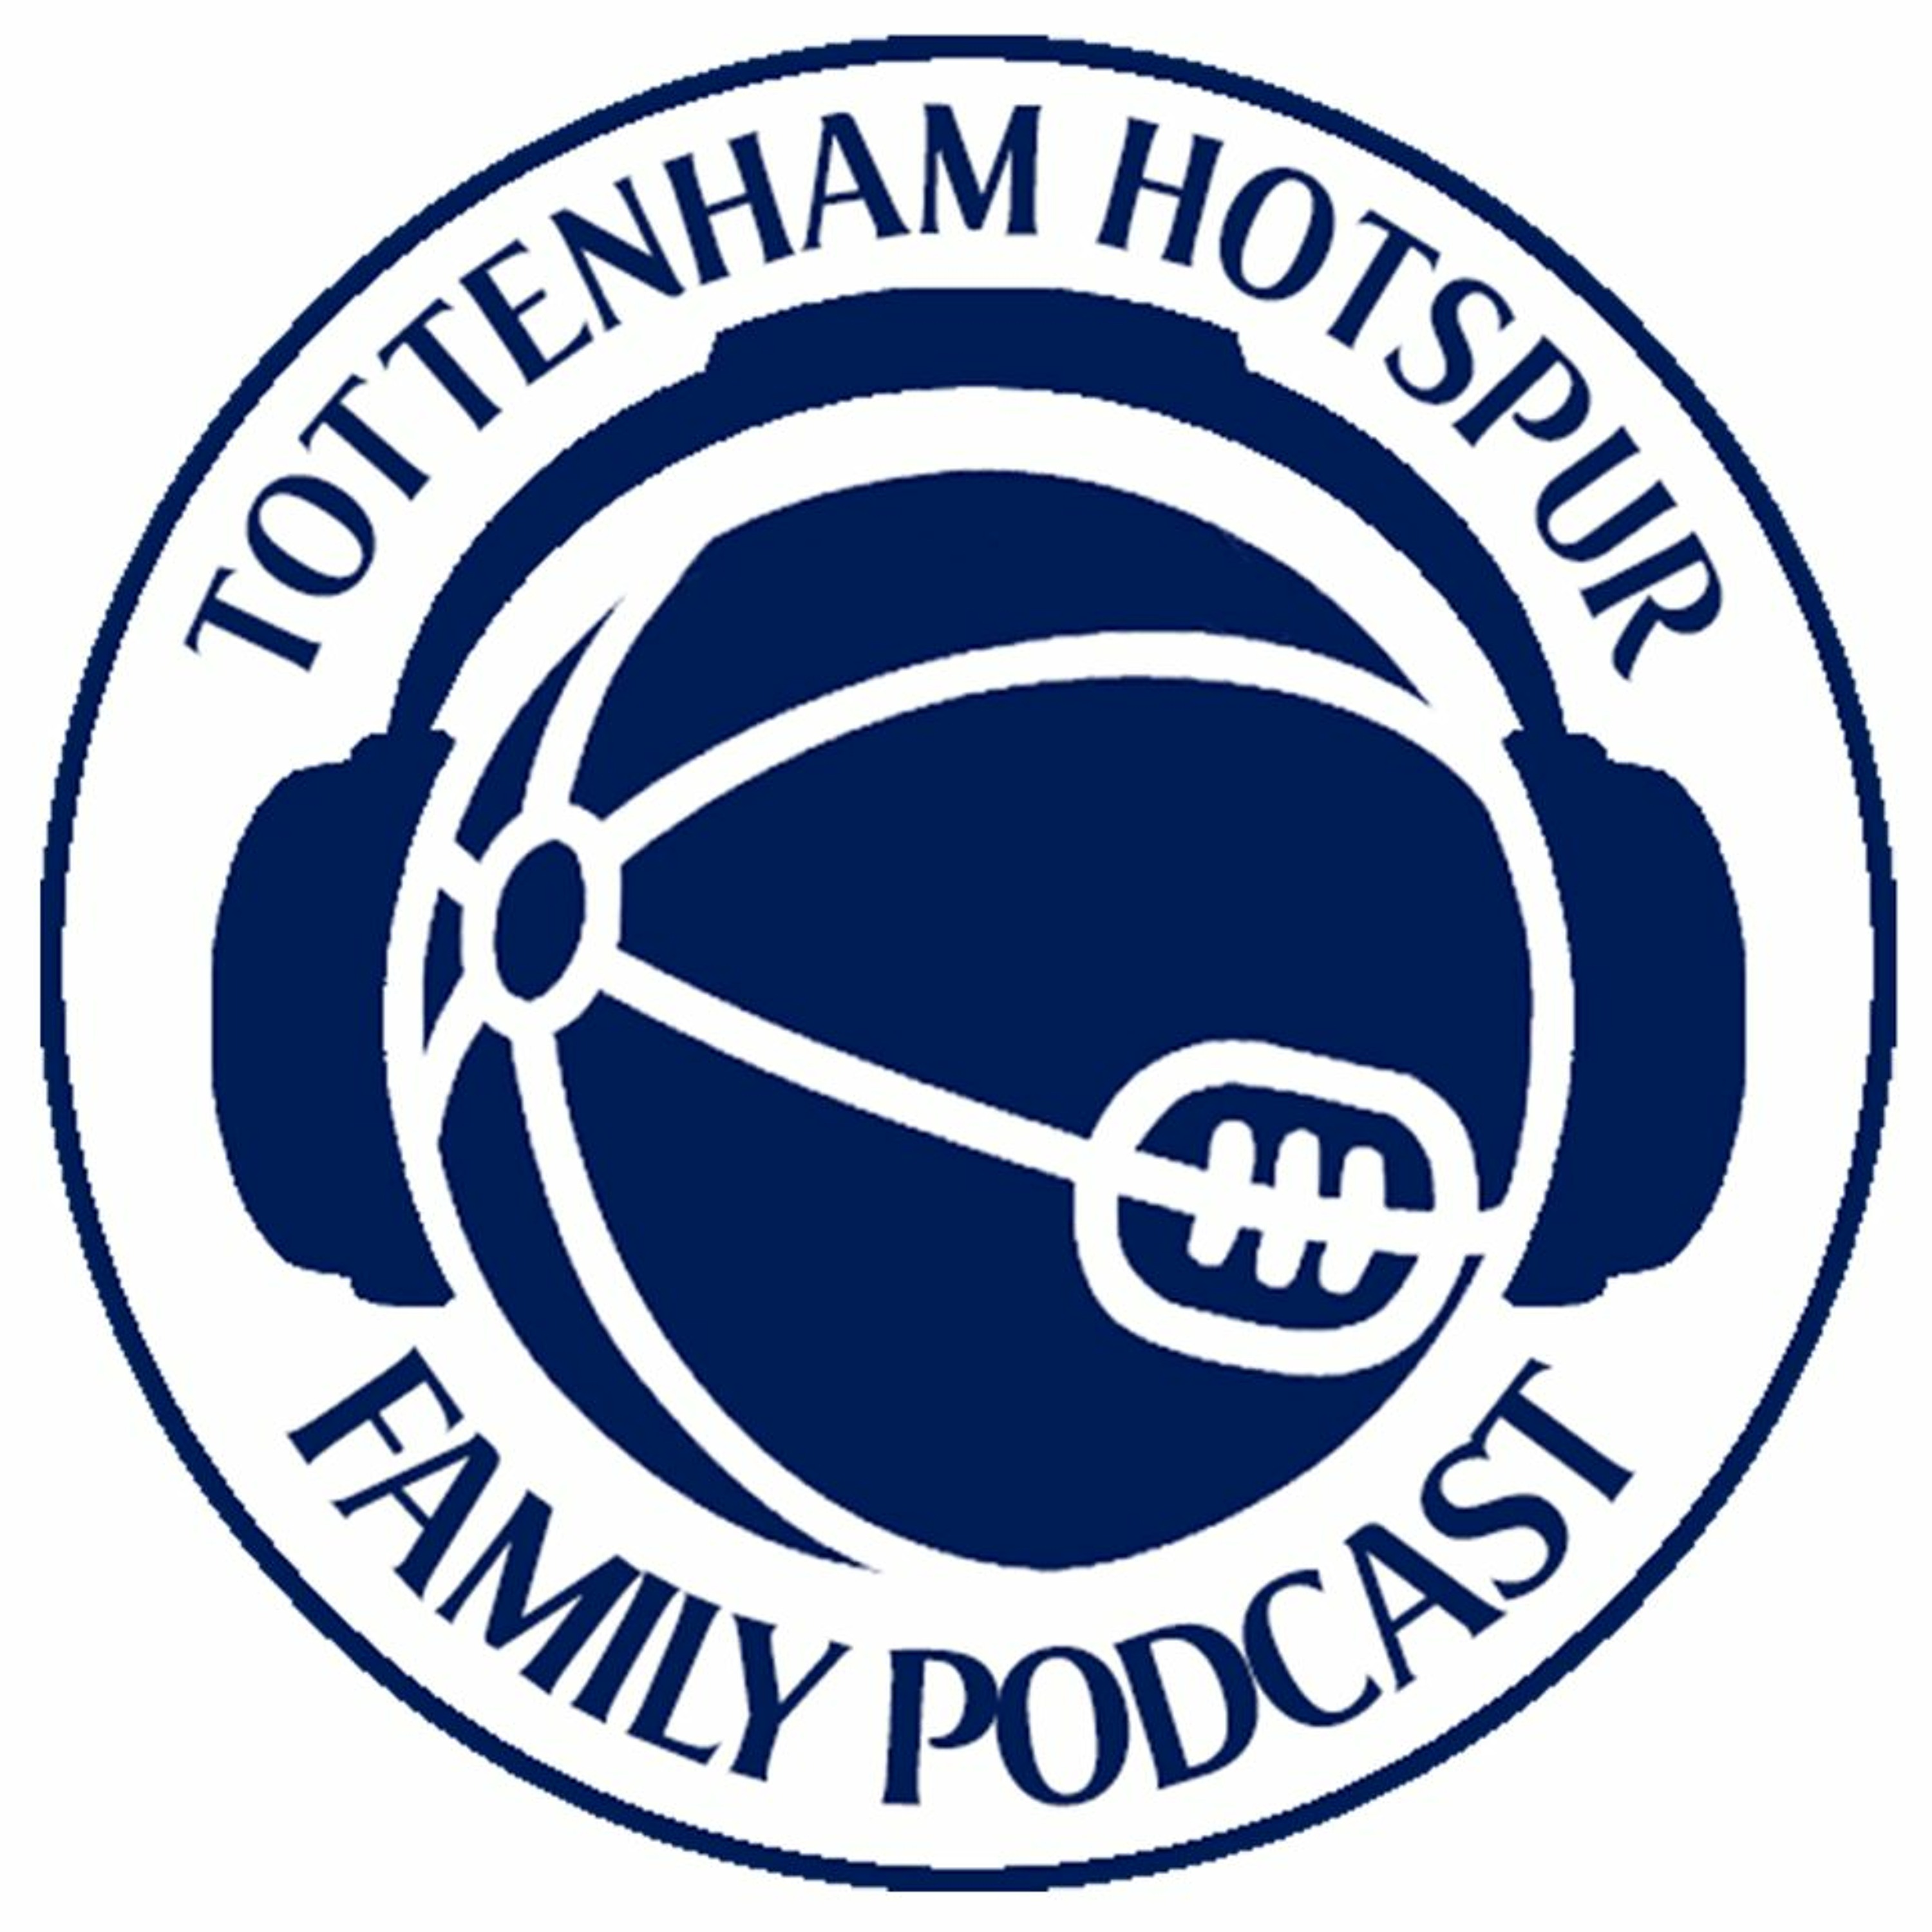 The Tottenham Hotspur Family Podcast - S6EP13 It’s all going on in Epping Forest